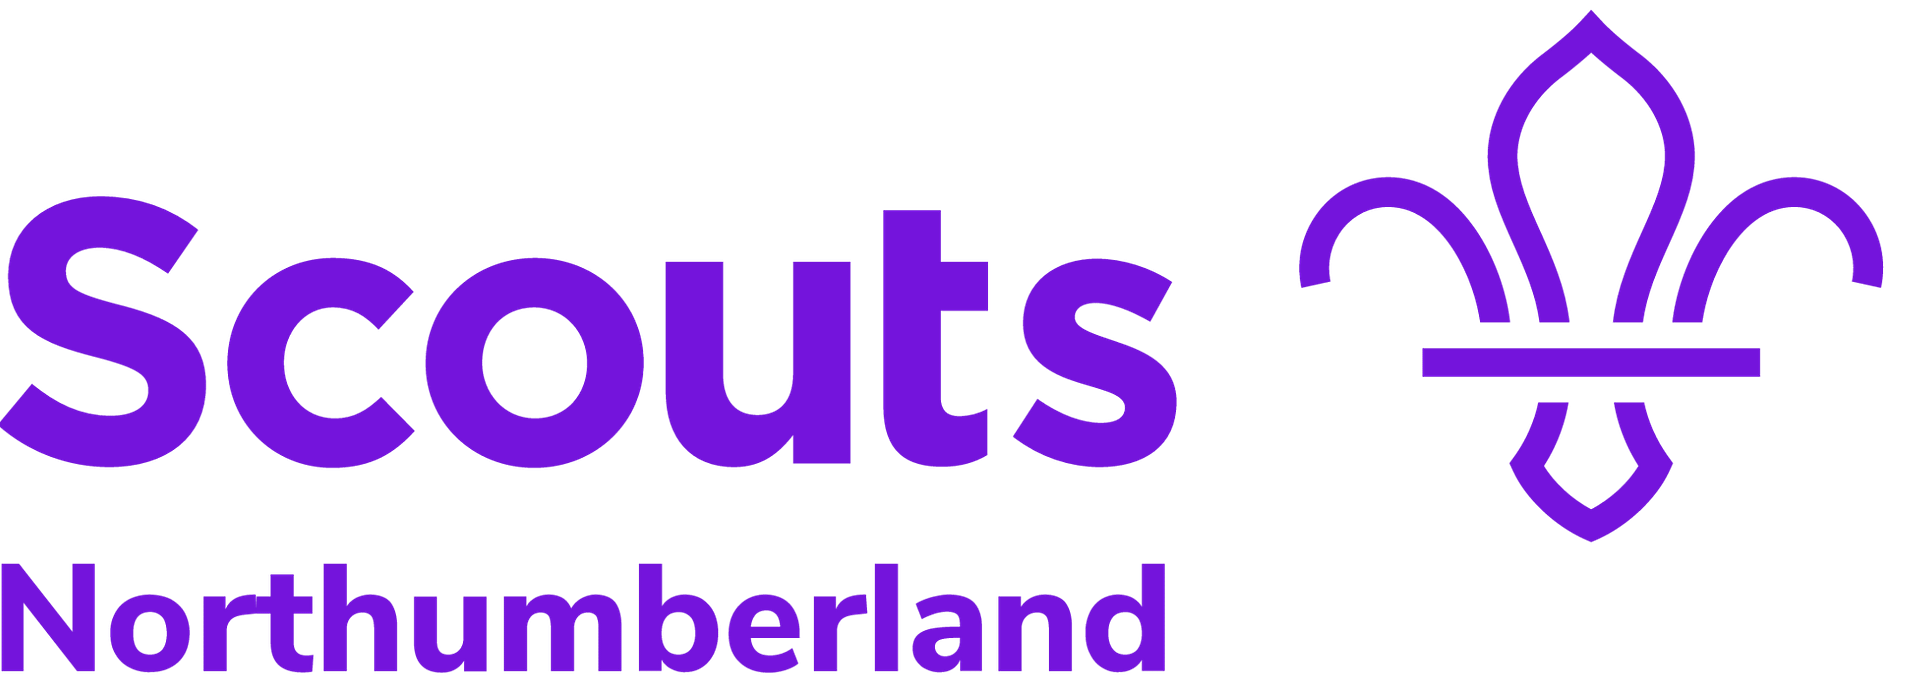 Northumberland Scouts